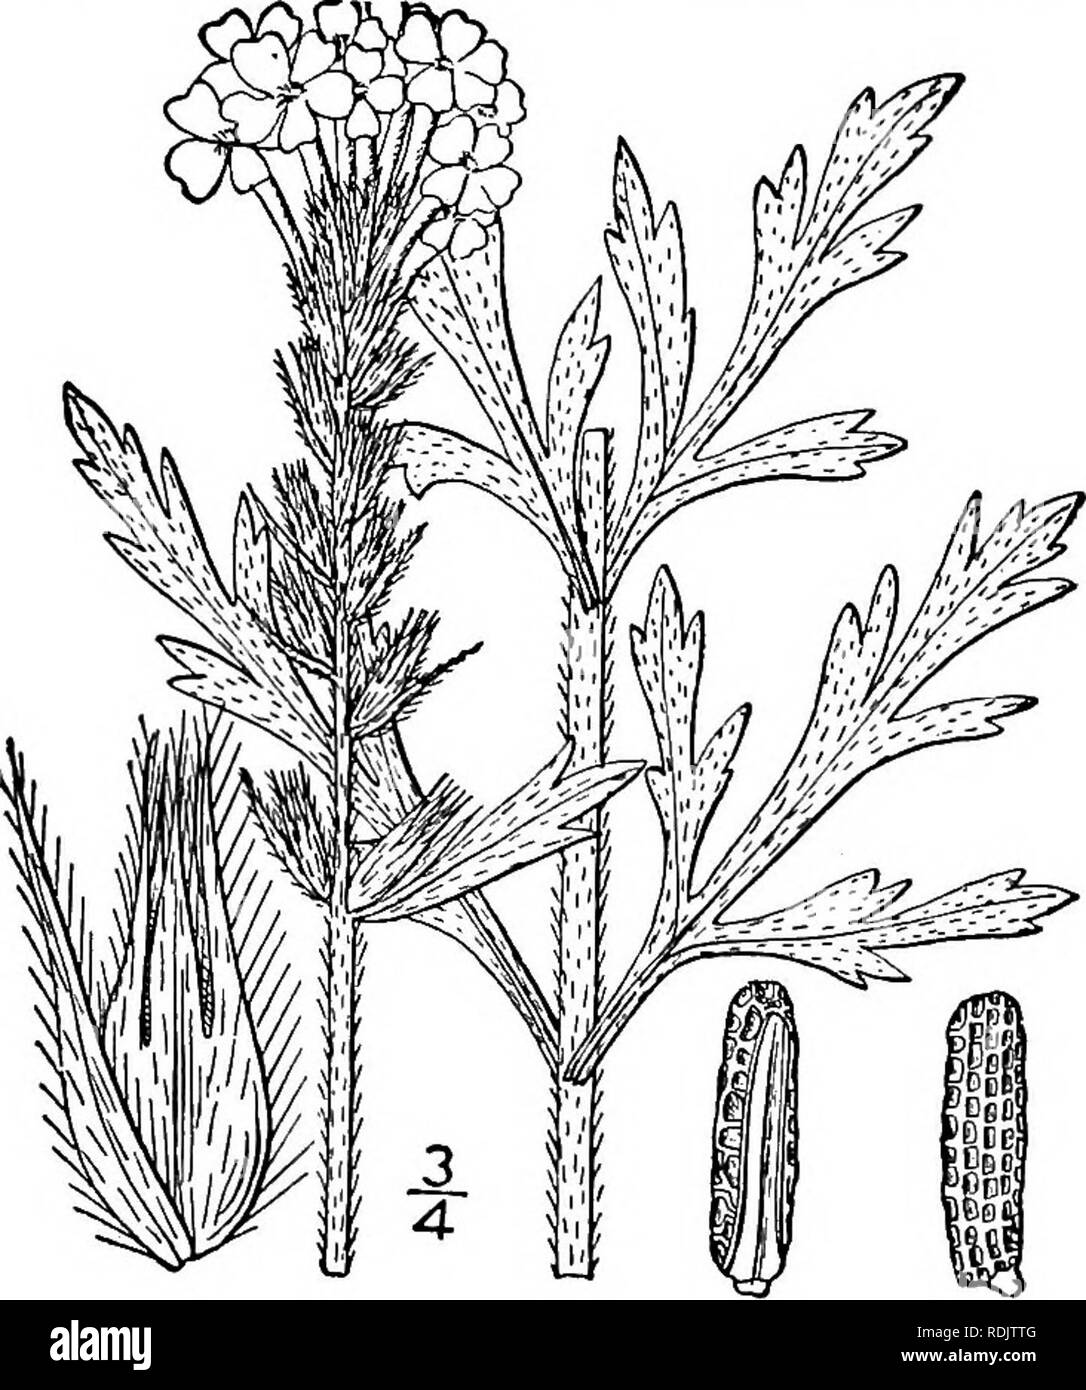 . An illustrated flora of the northern United States, Canada and the British possessions, from Newfoundland to the parallel of the southern boundary of Virginia, and from the Atlantic Ocean westward to the 102d meridian. Botany; Botany. Genus i. VERVAIN FAMILY. 97 7. Verbena canadensis (L.) Britton. Large-flowered Verbena. Fig. 3558. Buchnera canadensis L. Mant. 88. 1767. V. Aubletia Jacq. Hort. V. 2: 82. pi. 176. 1772. Clandularia carolinensis J. G. Gmel. Syst. 2: 920. 1796. Verbena canadensis Britton, Mem. Torr. Club 5: 276. 1894. Perennial, pubescent or glabrate; stem slen- der, usually bra Stock Photo